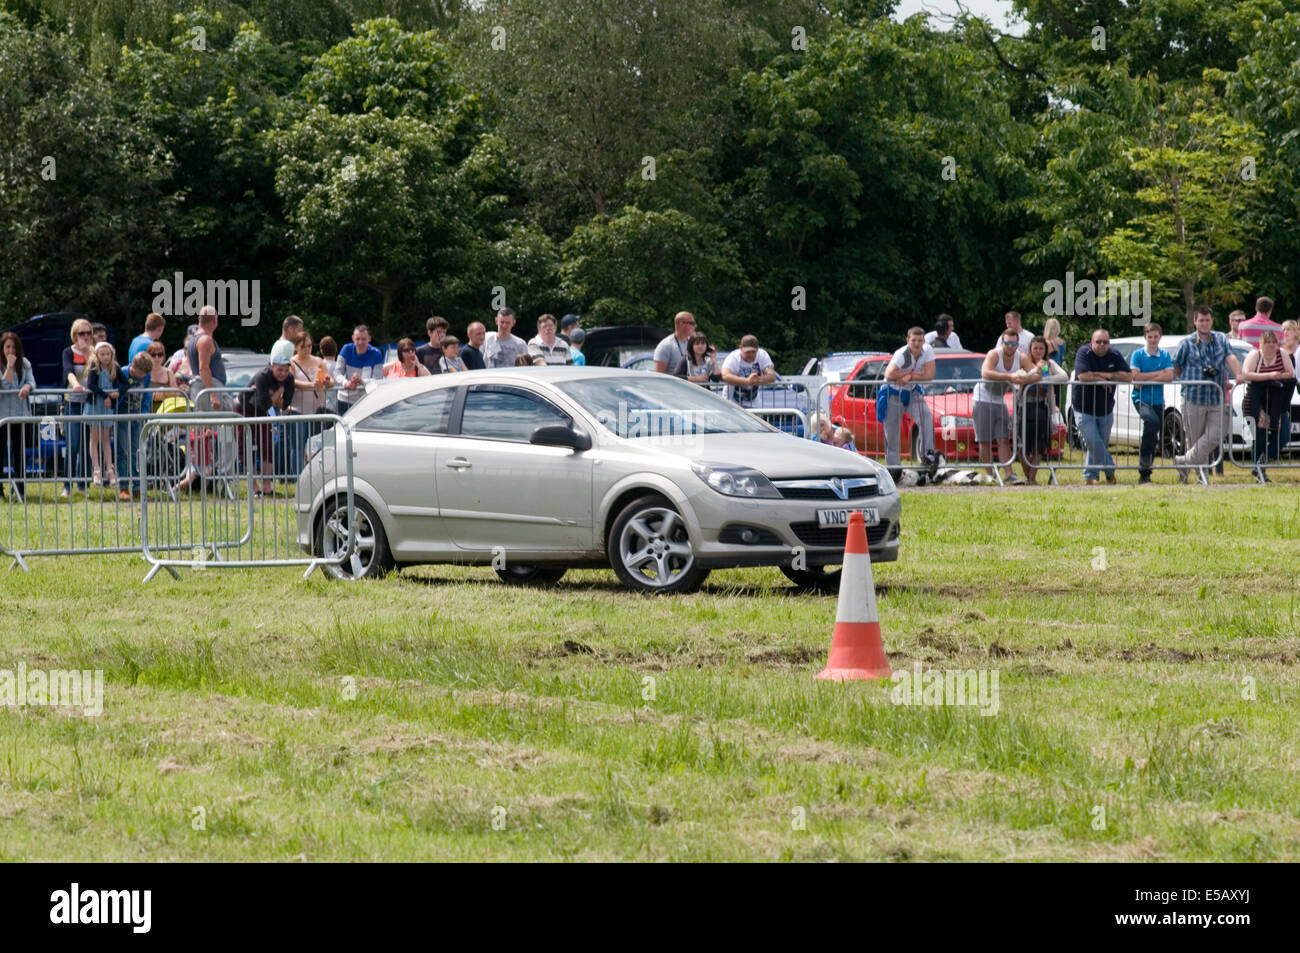 autotest auto testing test autotesting vauxhall astra gate box competition car cars Stock Photo